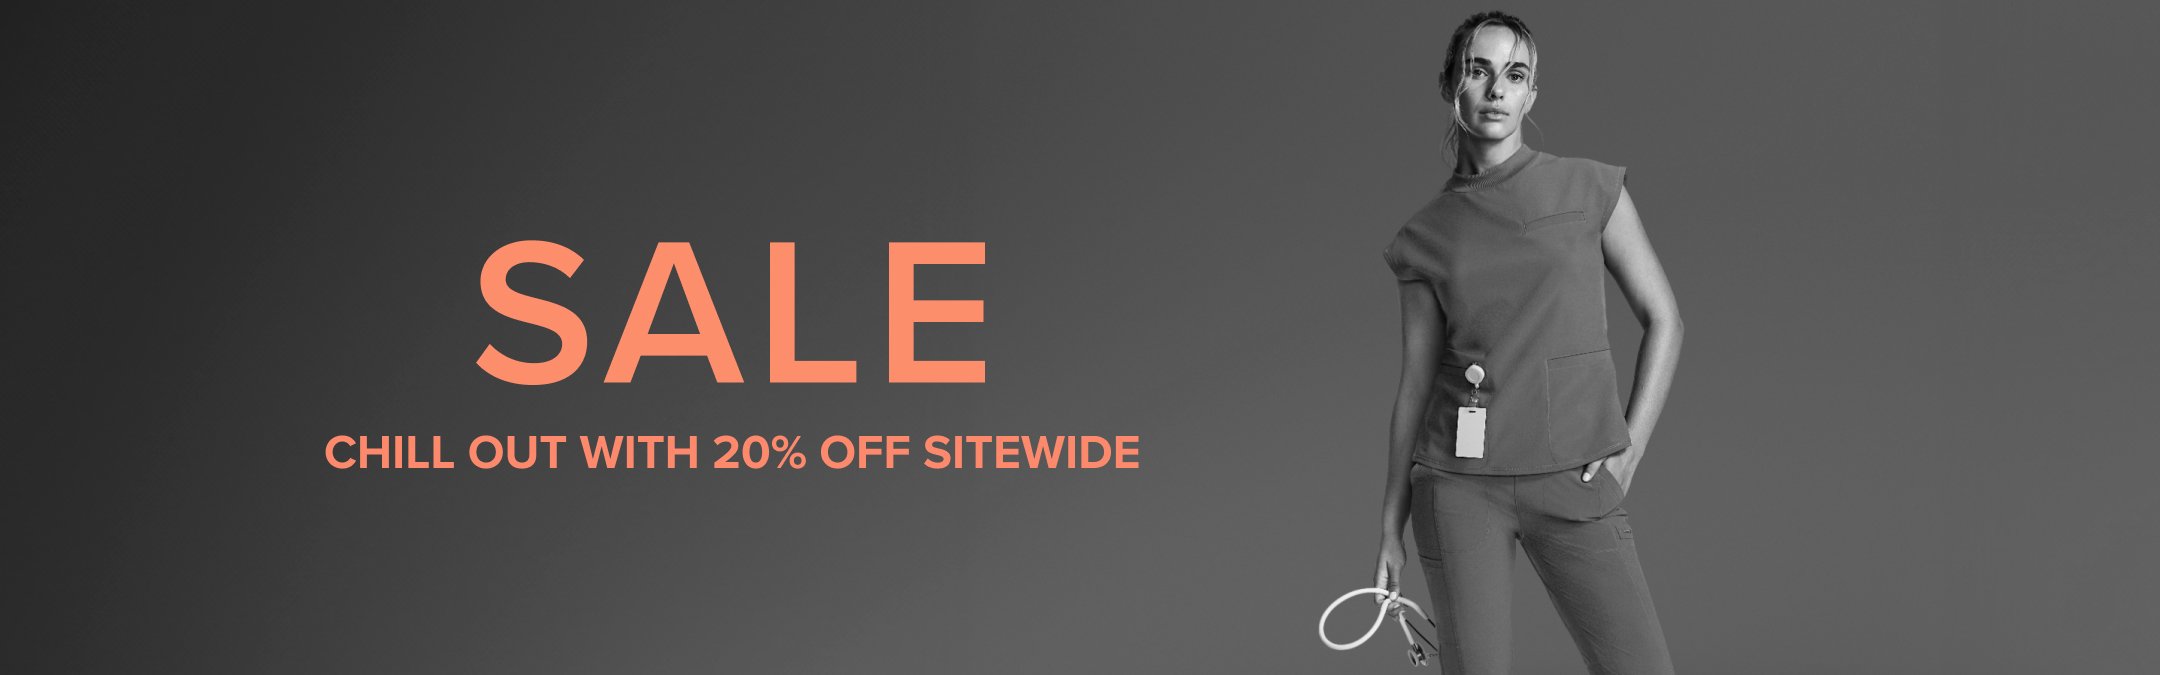 chill out with 20% off sitewide.